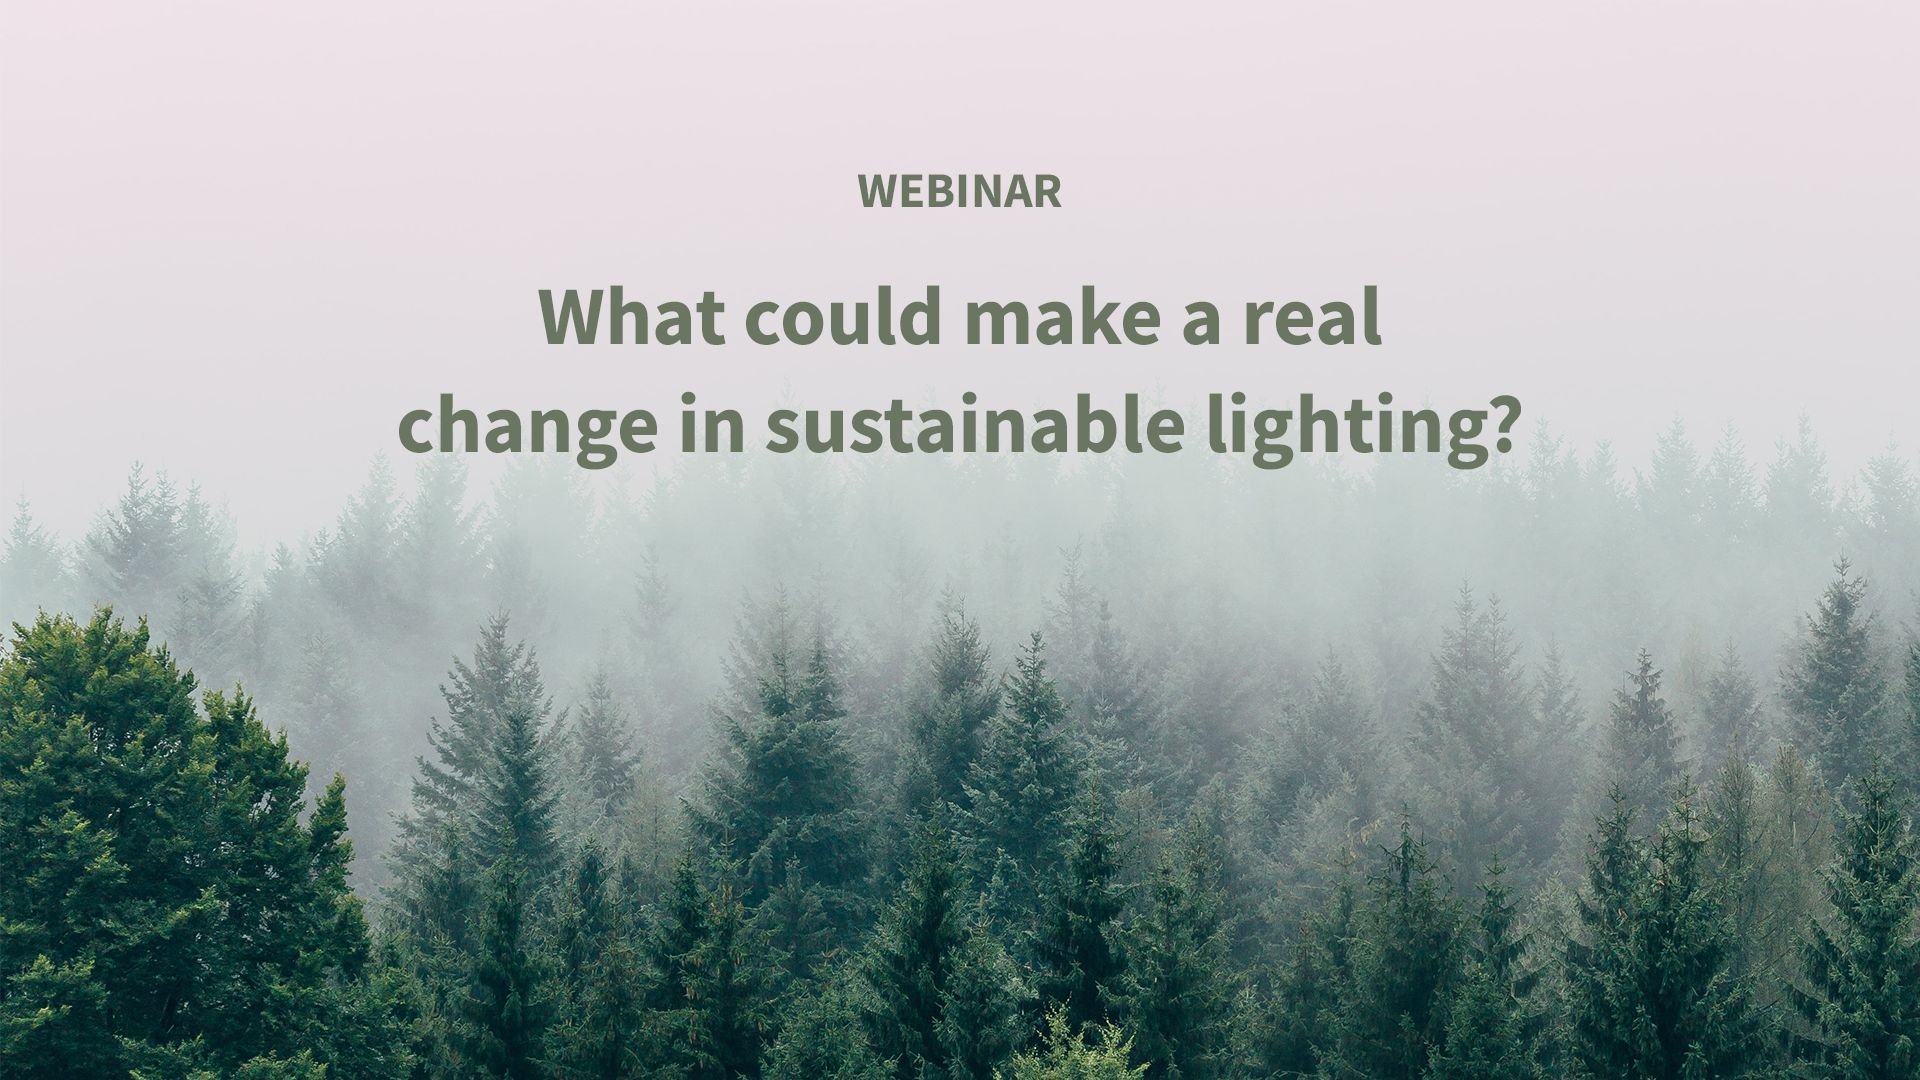 What could make a real change in sustainable lighting